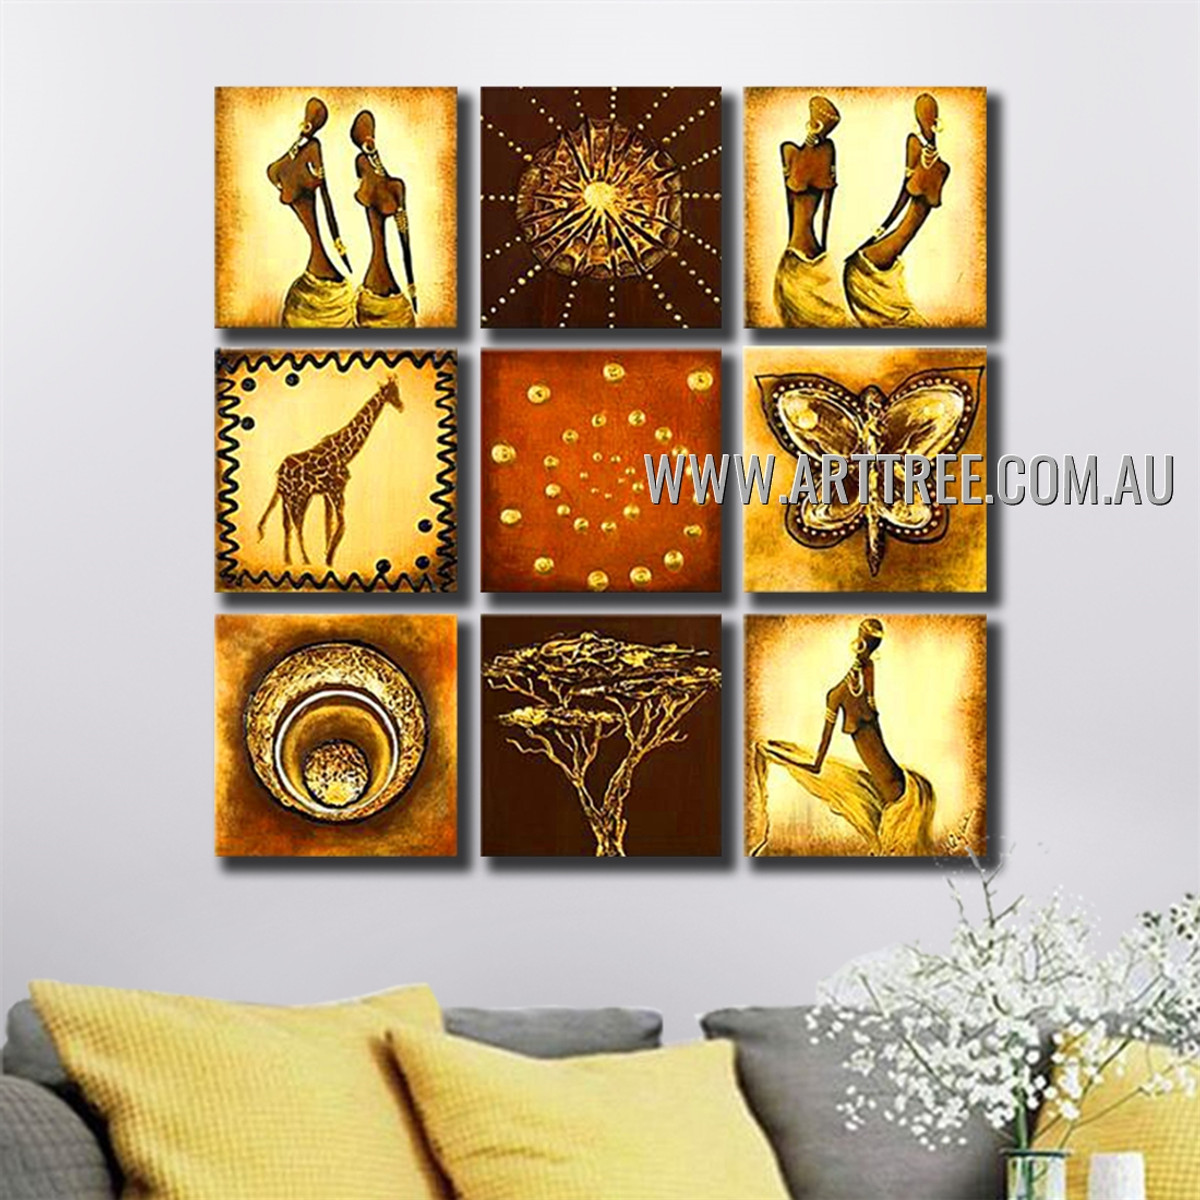 Swirl Abstract Vintage Handmade Artist Heavy Texture 9 Piece Split Oil Paintings Wall Art Set For Room Tracery